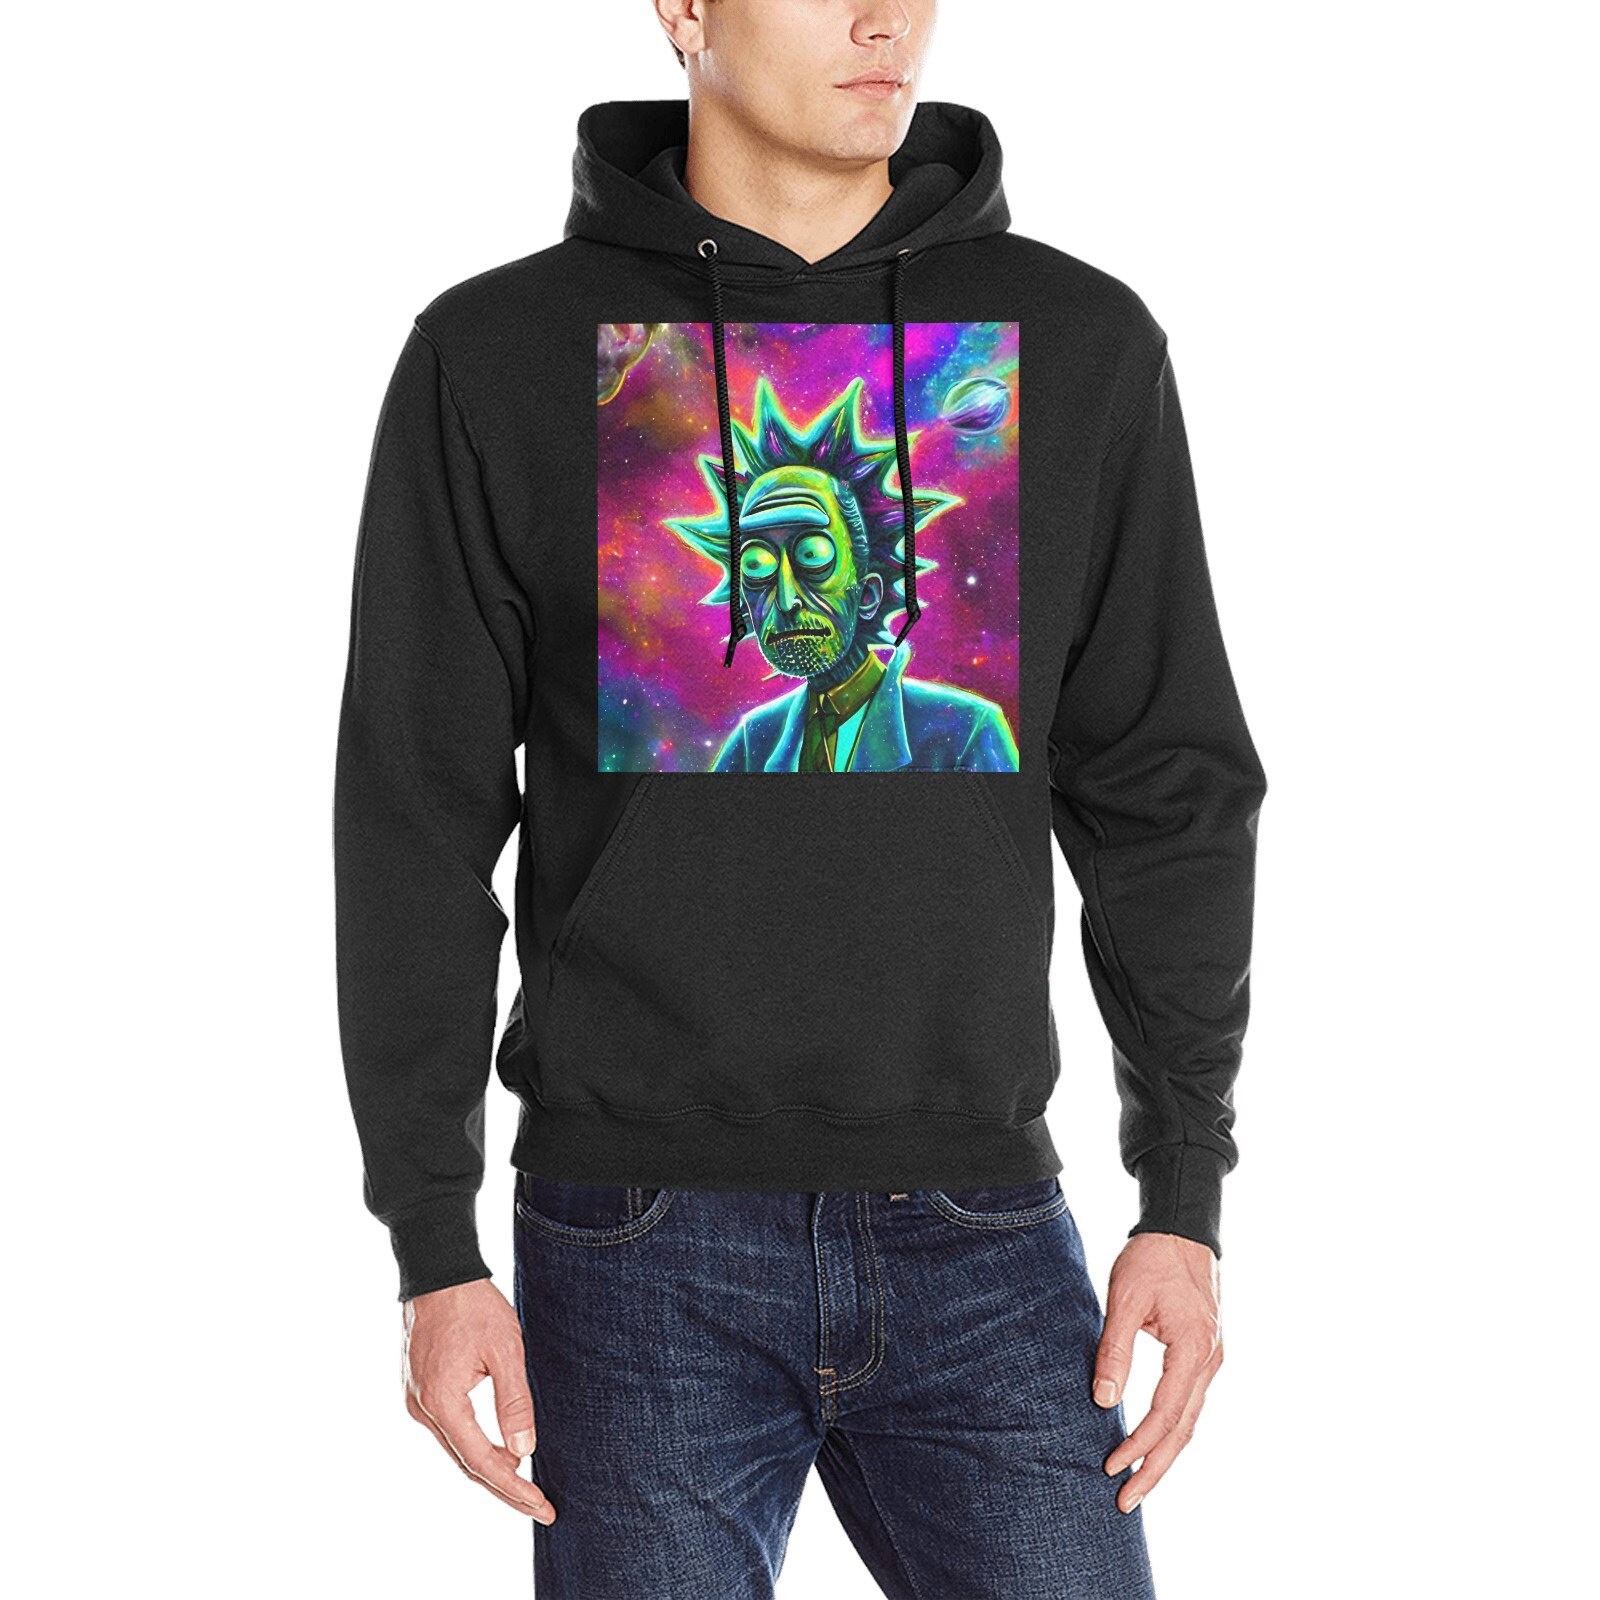 Discover Rick and Morty Hoodie, Rick Sanchez Hoodie, Unisex Gift Idea, Rick and Morty Cartoon Hoodies